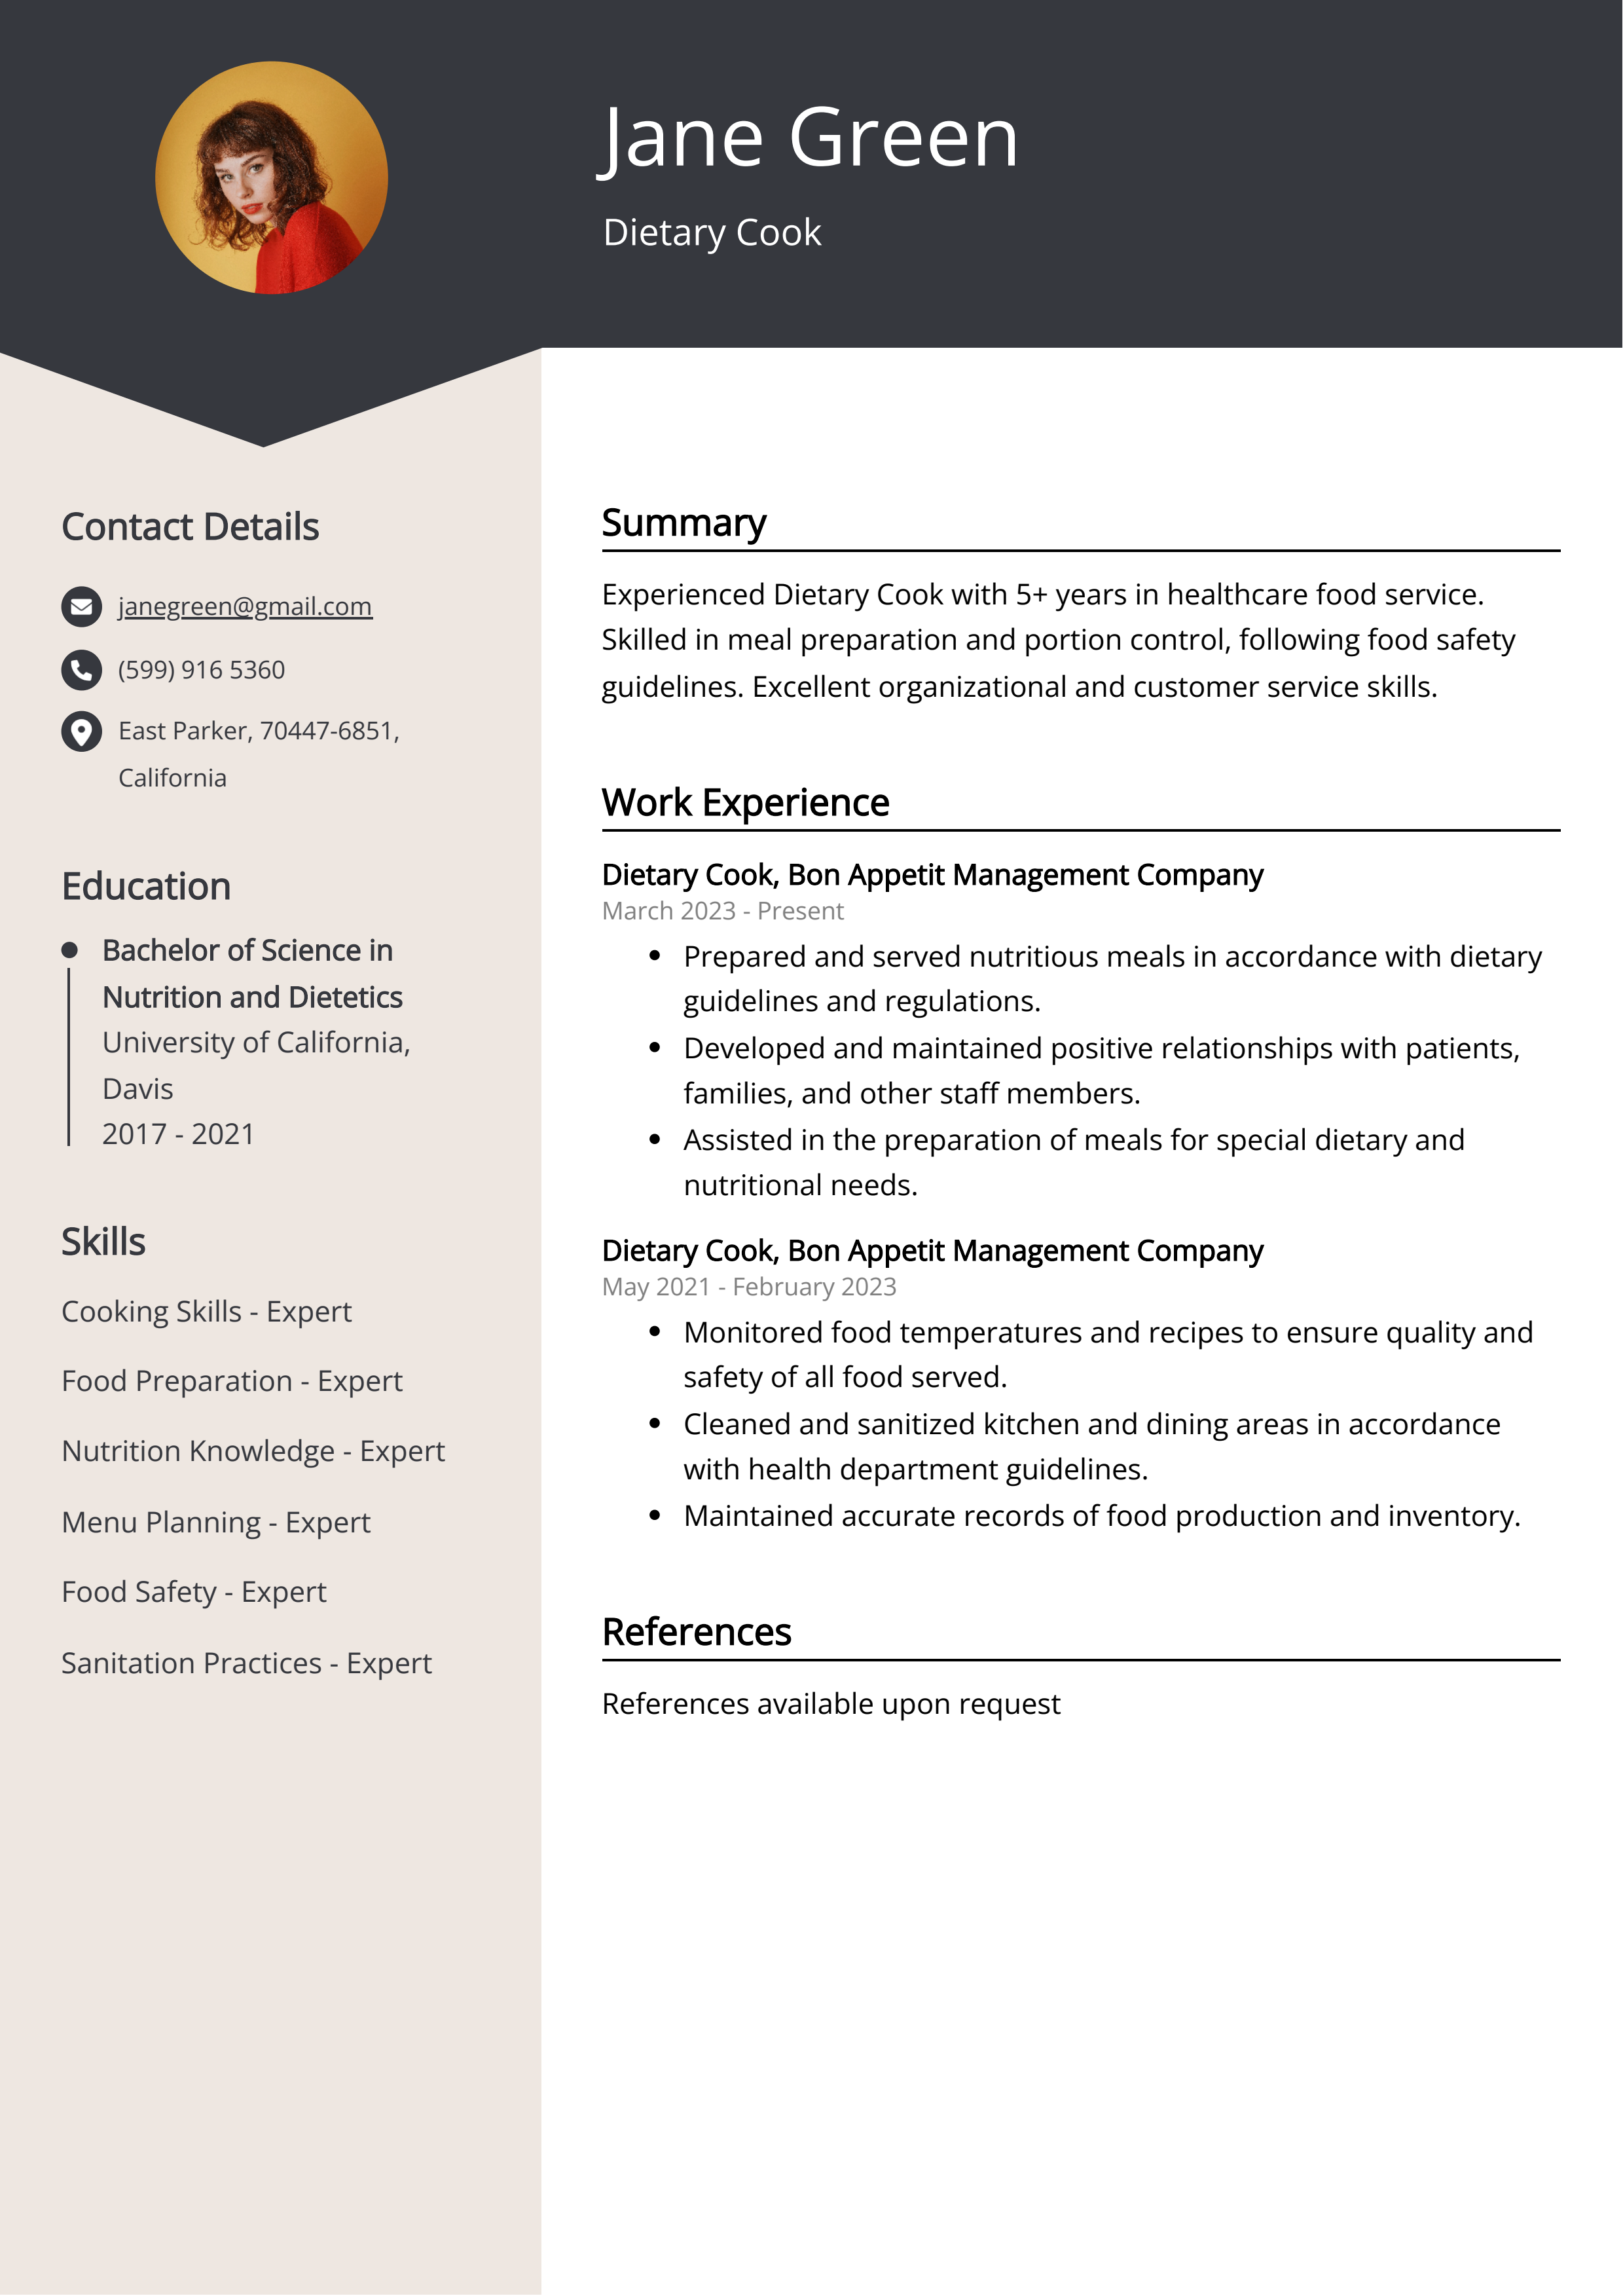 Dietary Cook CV Example